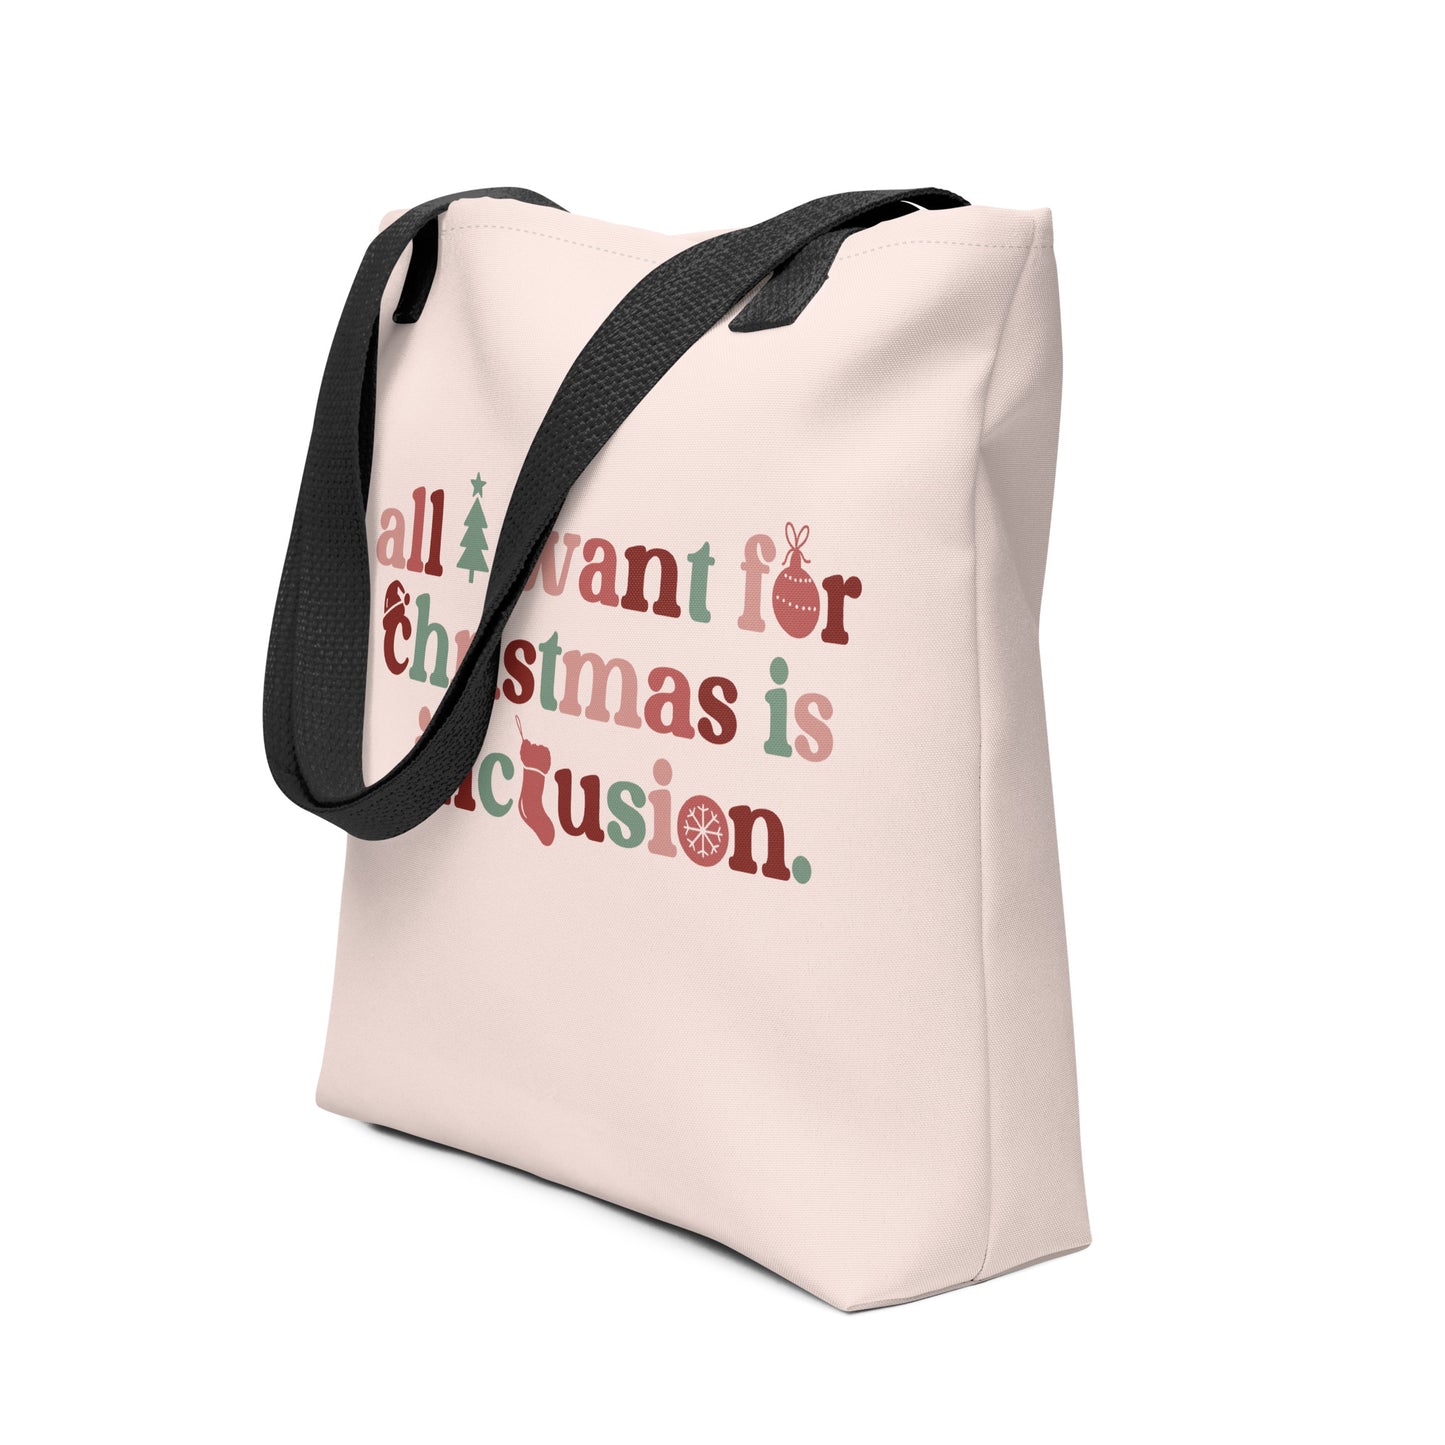 All I Want for Christmas is Inclusion | Tote